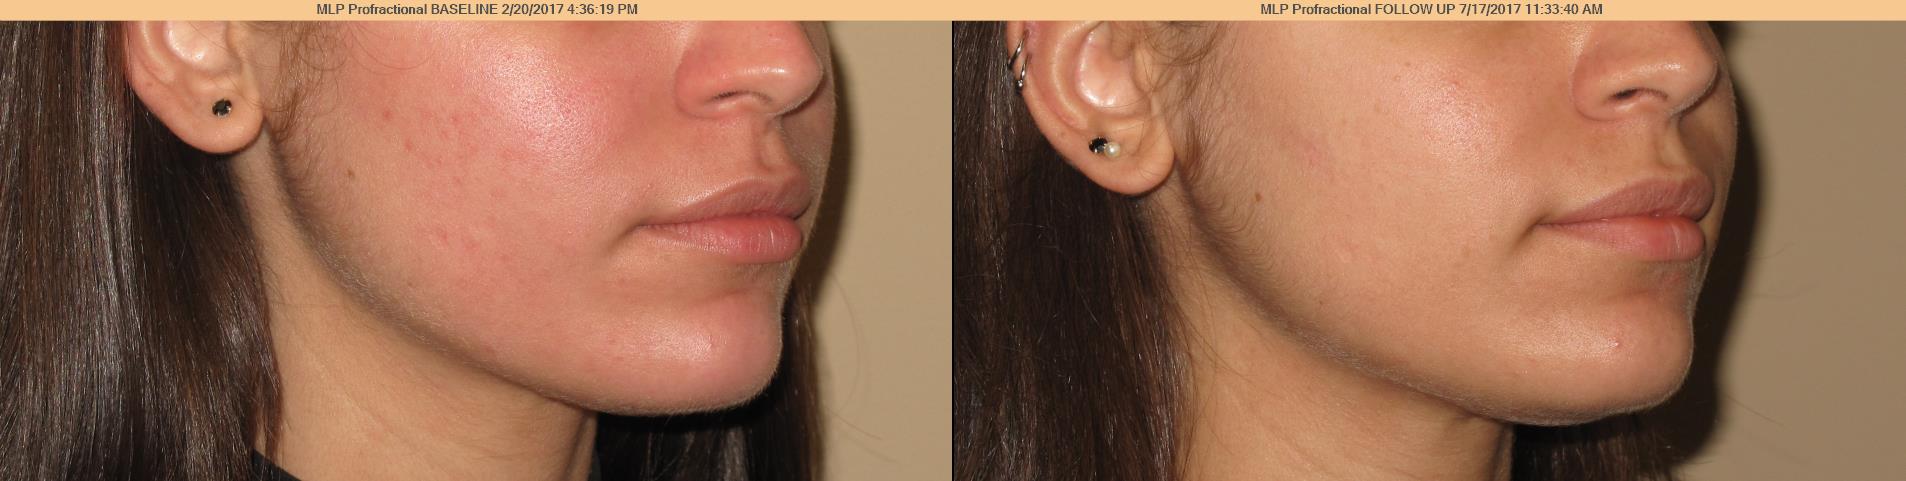 Micro needling before and after